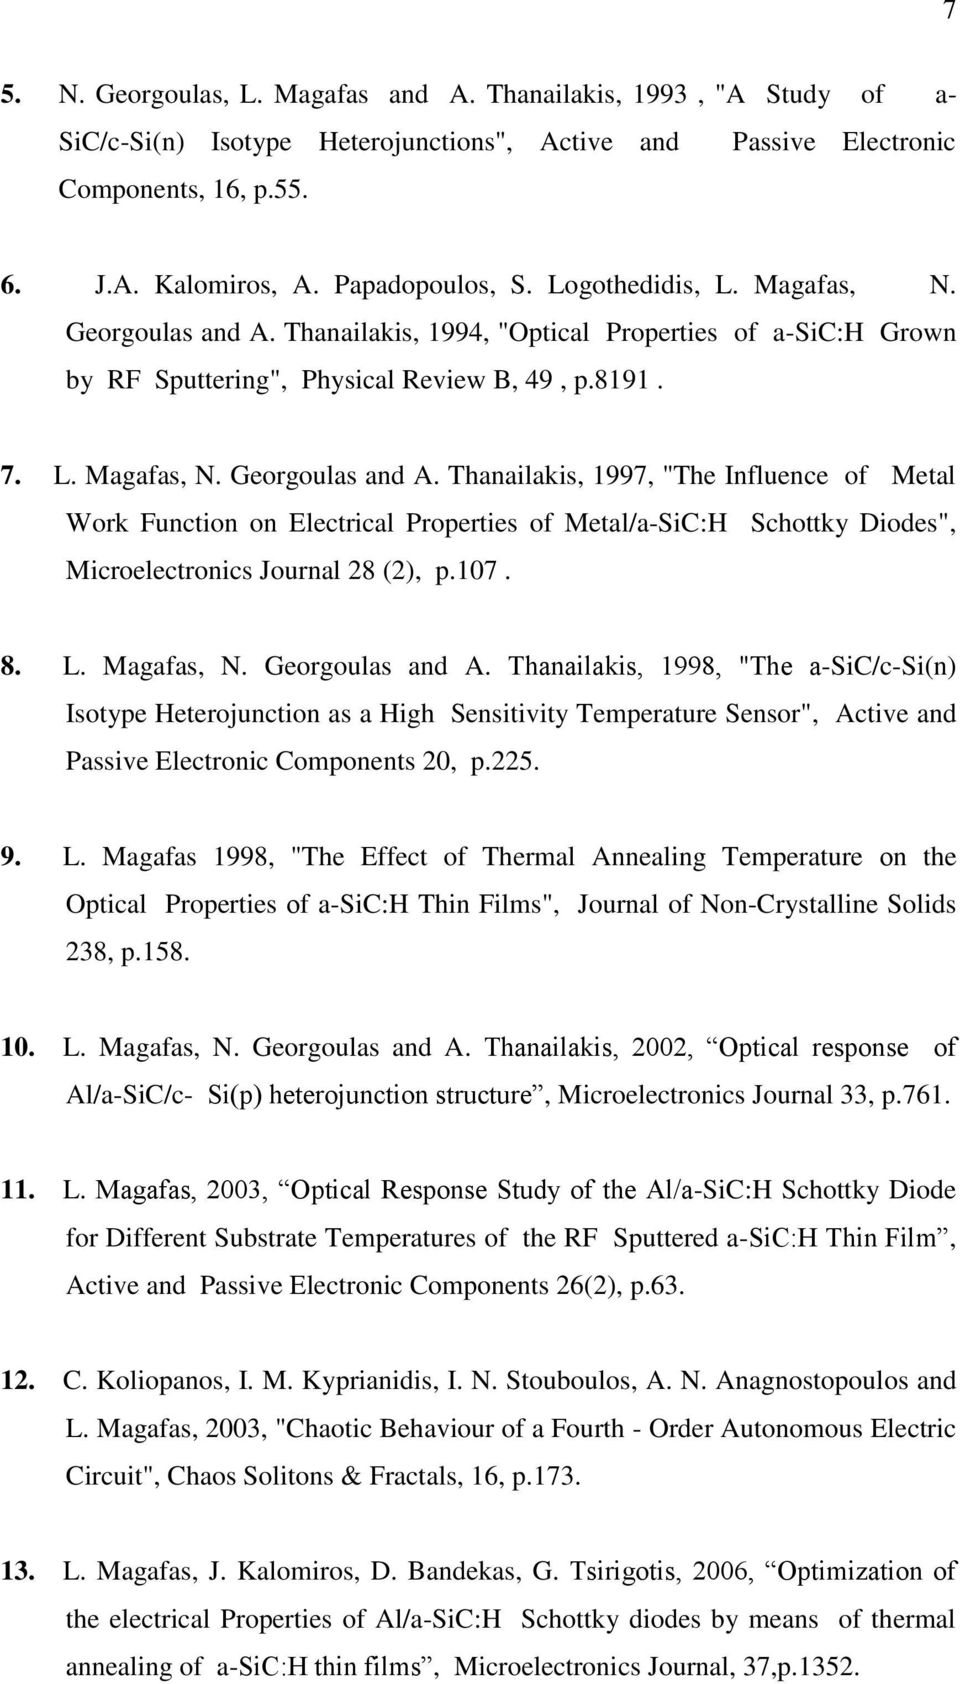 107. 8. L. Magafas, N. Georgoulas and A. Thanailakis, 1998, "Τhe a-sic/c-si(n) Isotype Heterojunction as a High Sensitivity Temperature Sensor", Active and Passive Electronic Components 20, p.225. 9.